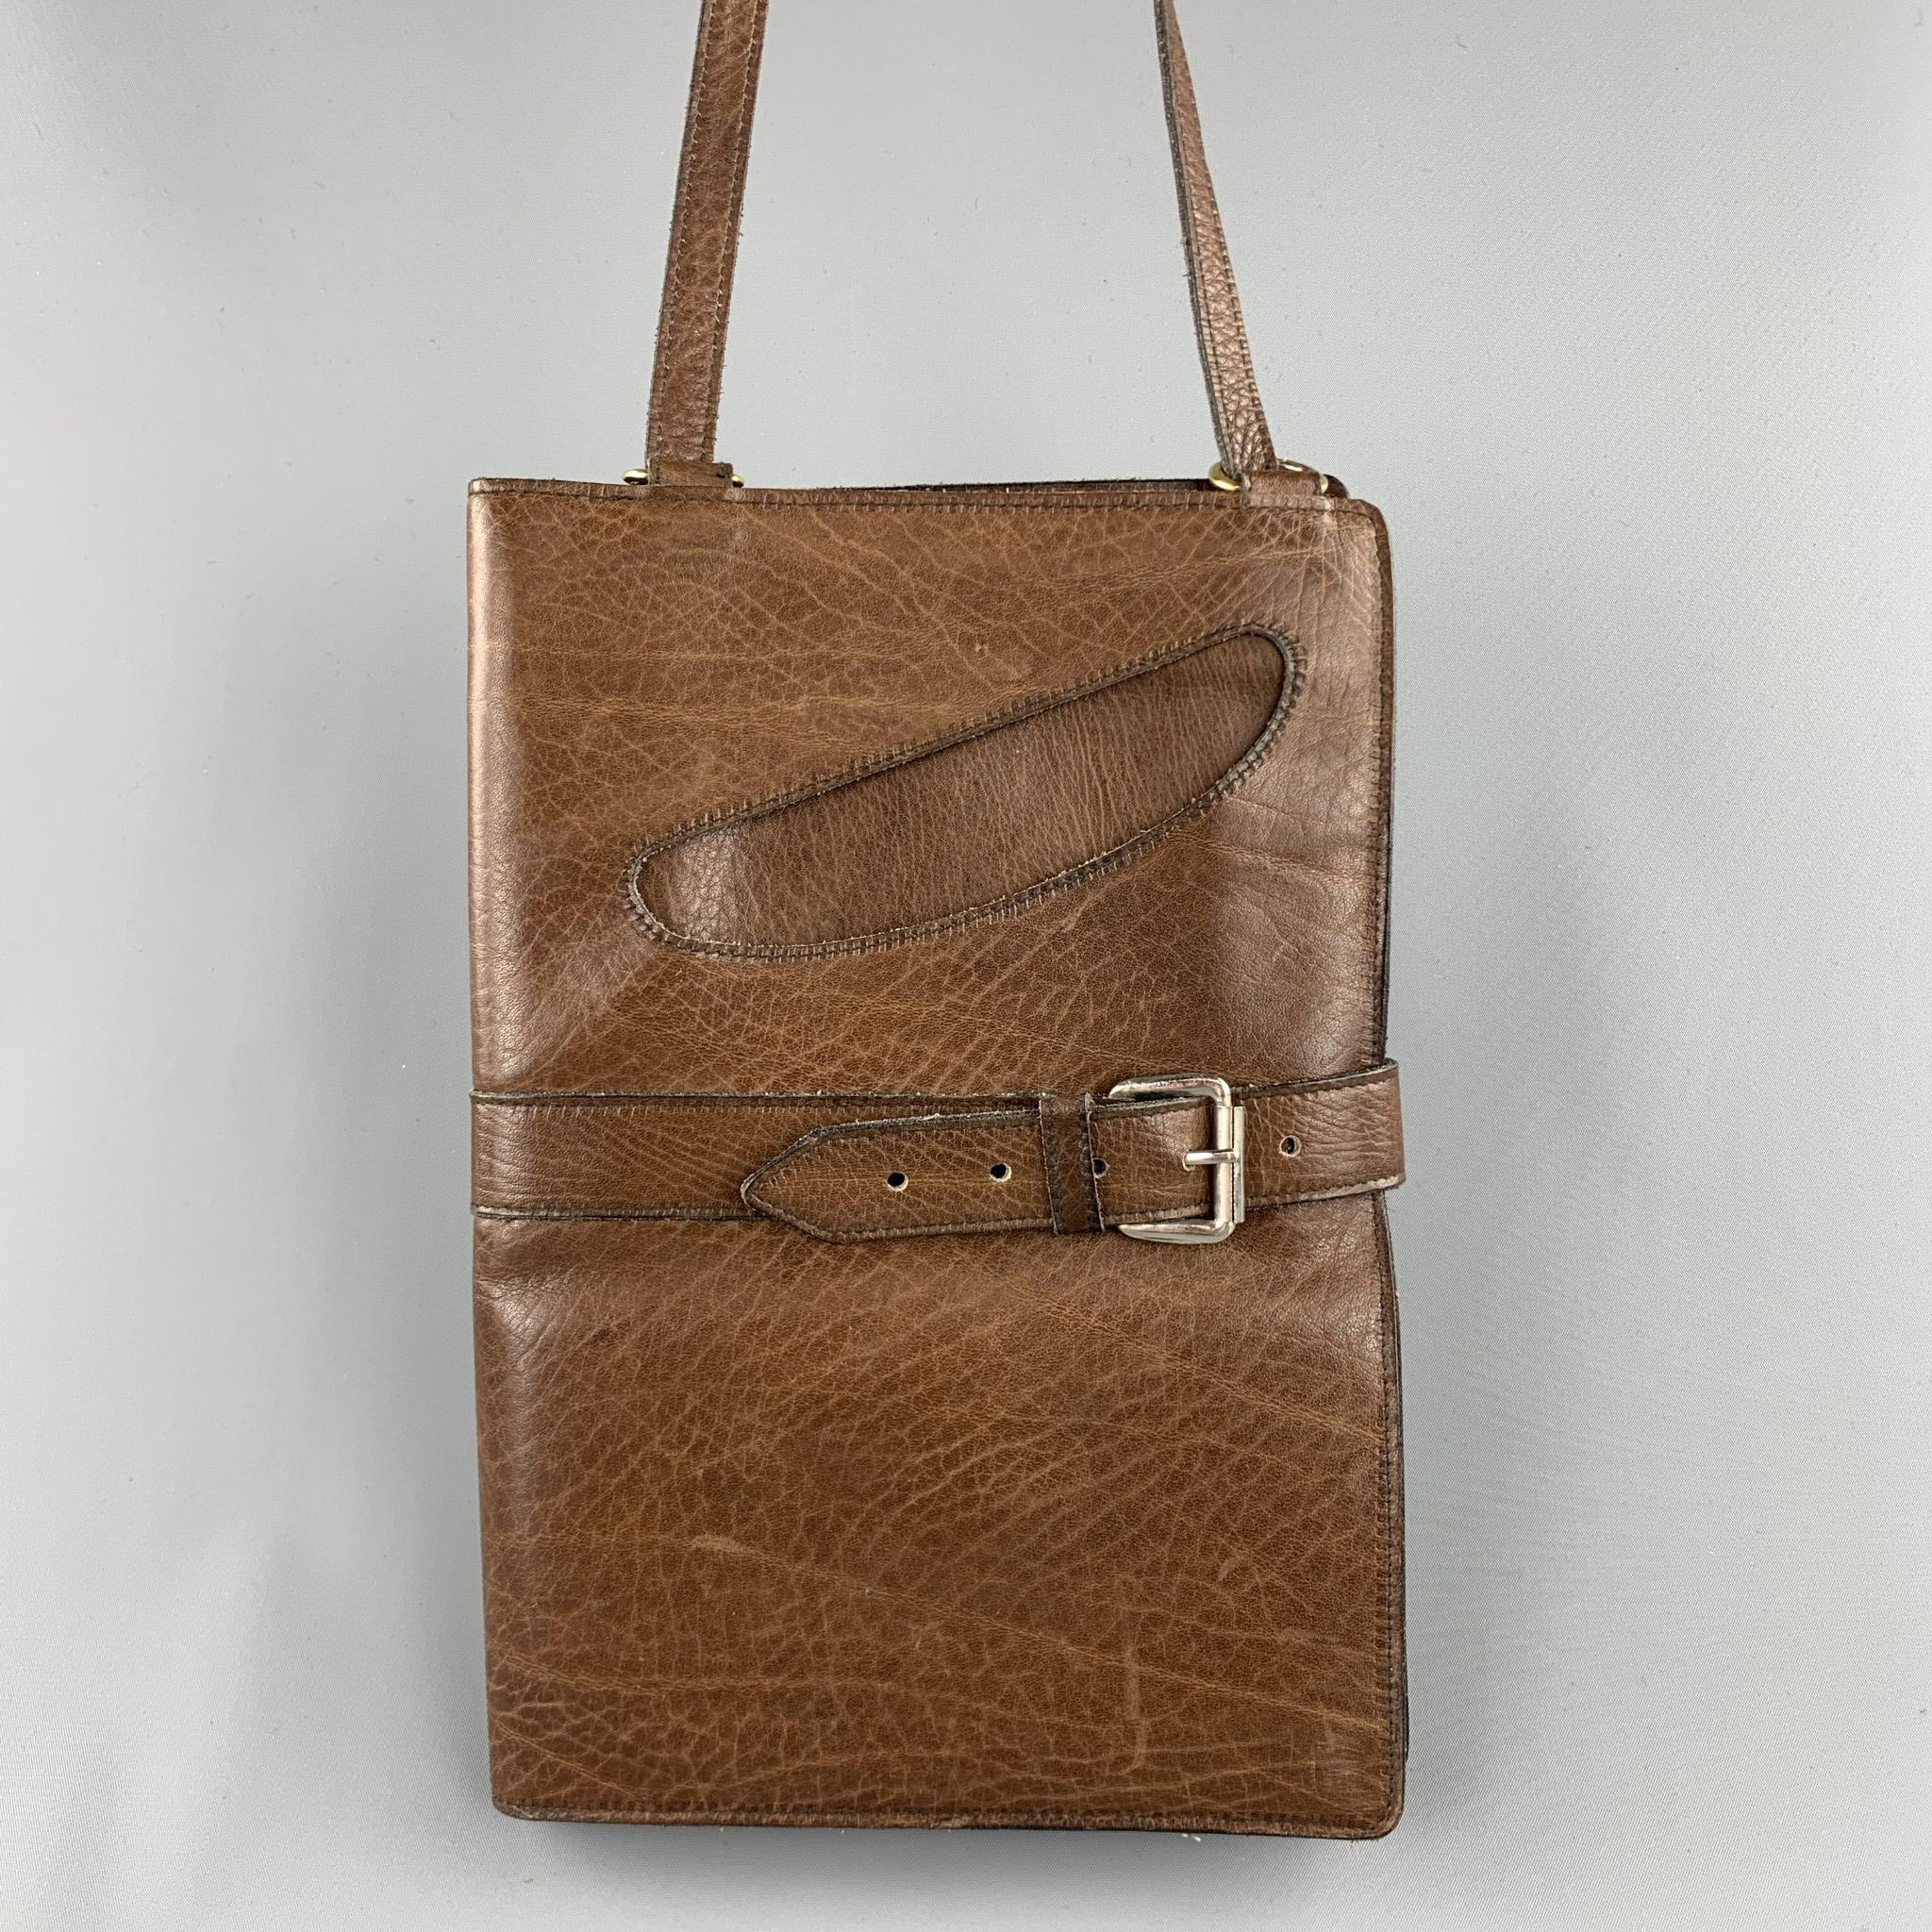 Vintage WILKES BASHFORD shoulder bag comes in a brown leather featuring a front cut out detail, inner pockets, and a strap buckle closure. Buckle strap ripped. As-Is. Made in Italy.

Very Good Pre-Owned Condition.

Measurements:

Length: 15 in.